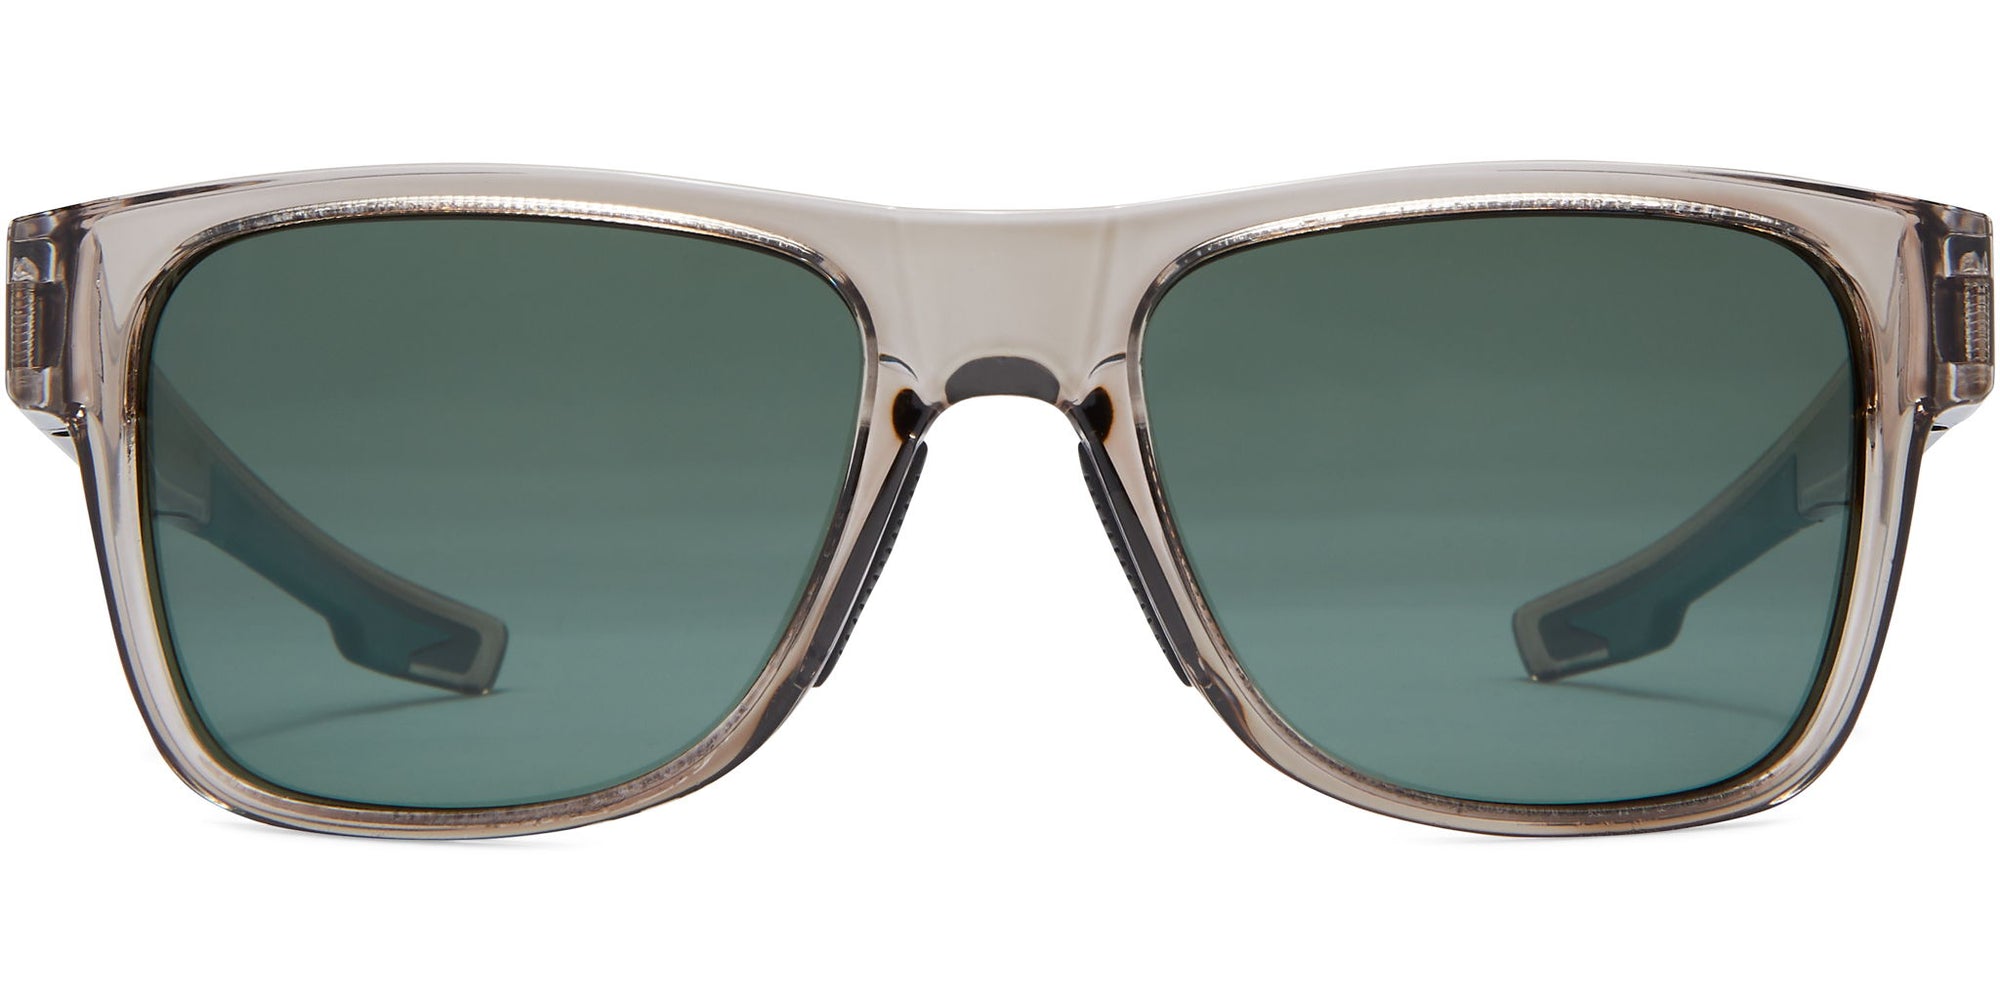 Cover - Crystal Taupe/Green Lens - Polarized Sunglasses